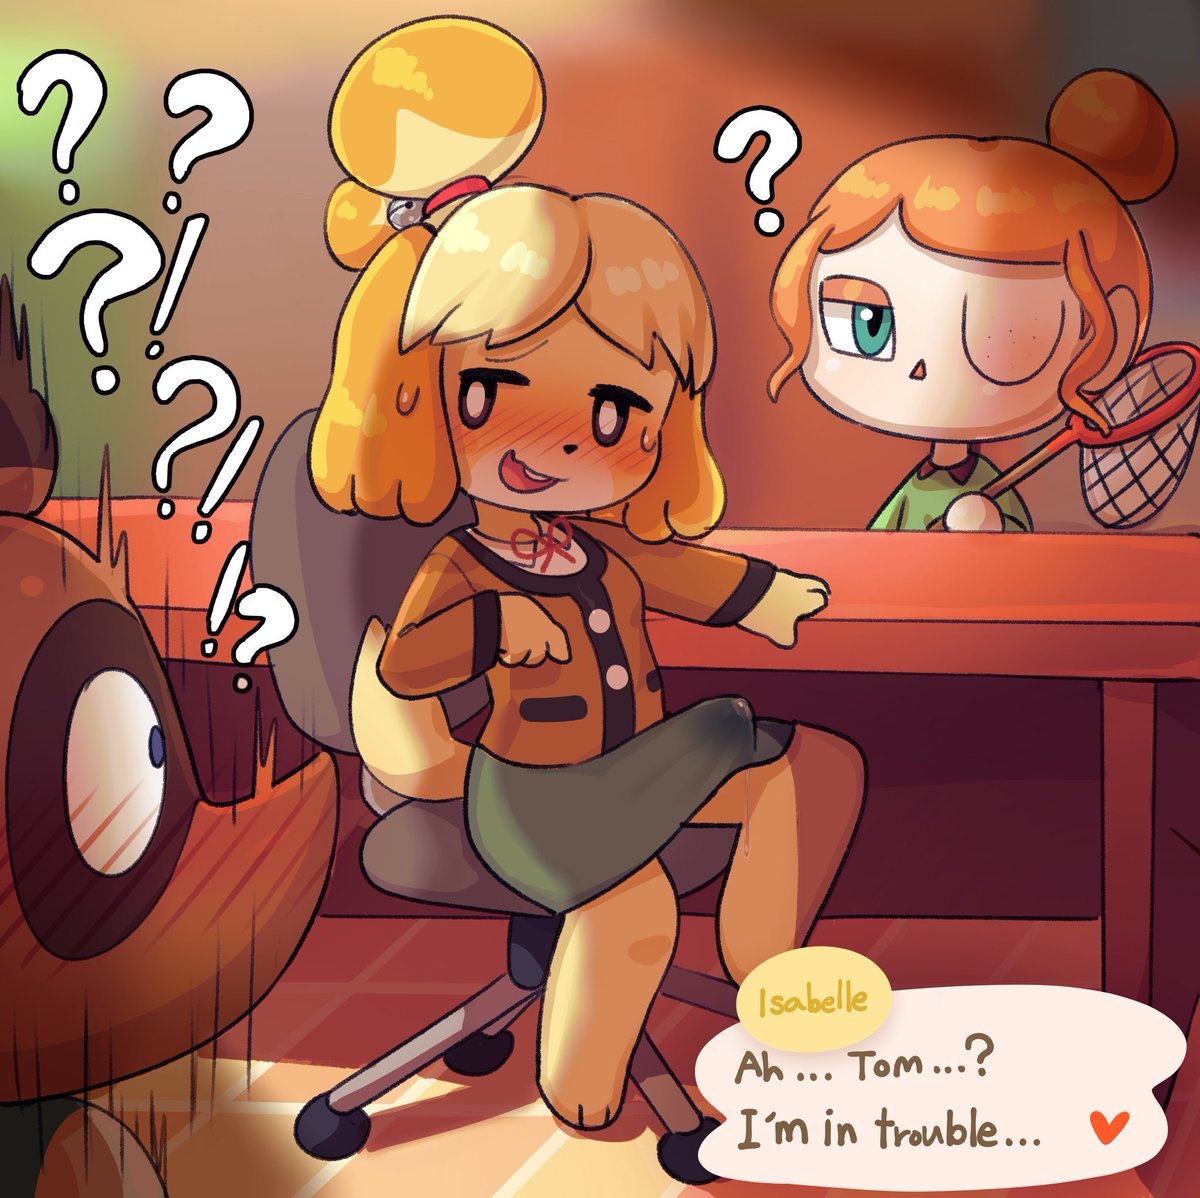 Isabelle’s trouble.